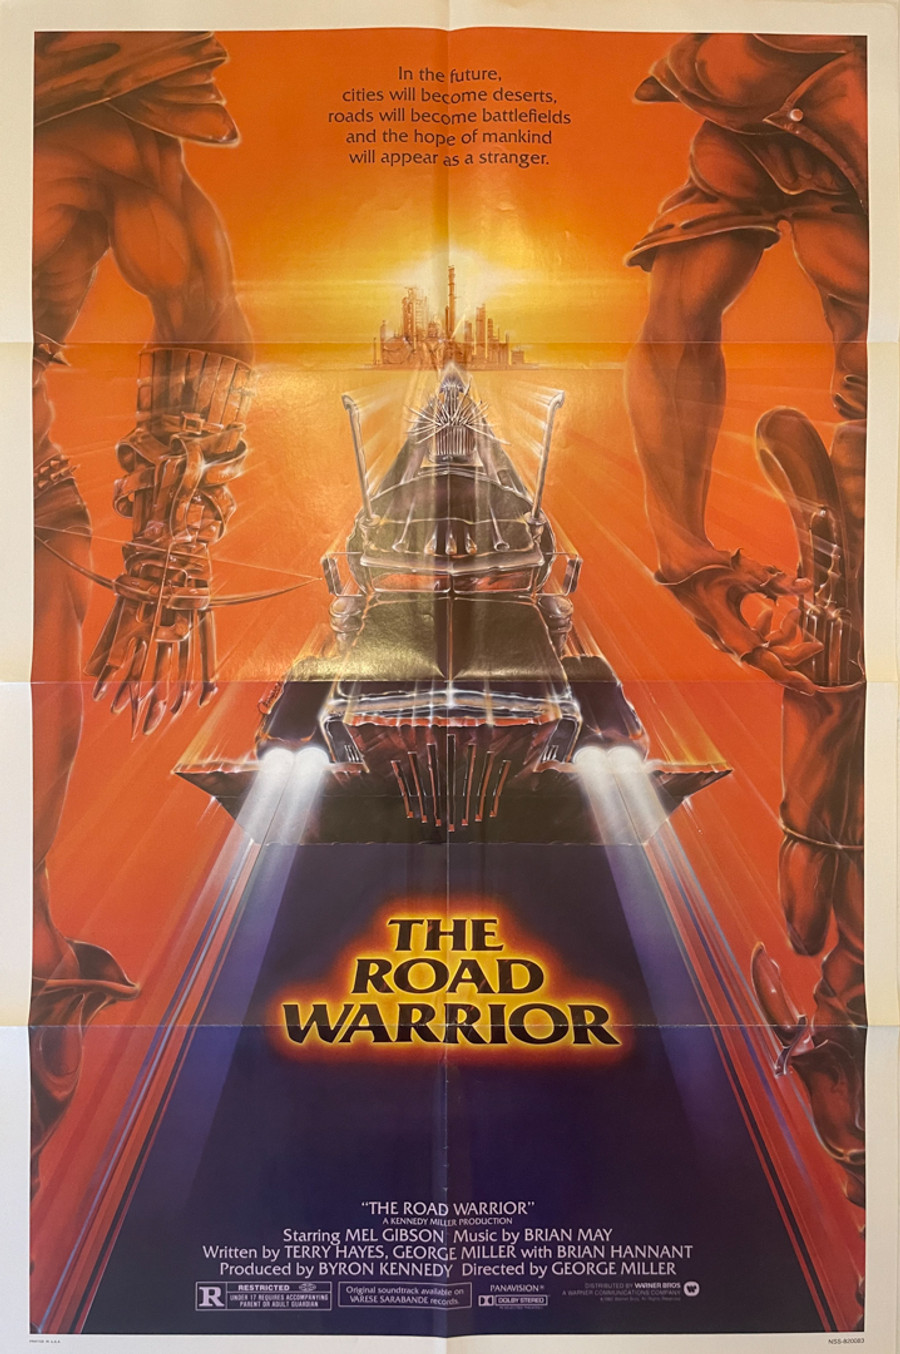 The Road Warrior (1982) starring Mel Gibson depicts truck